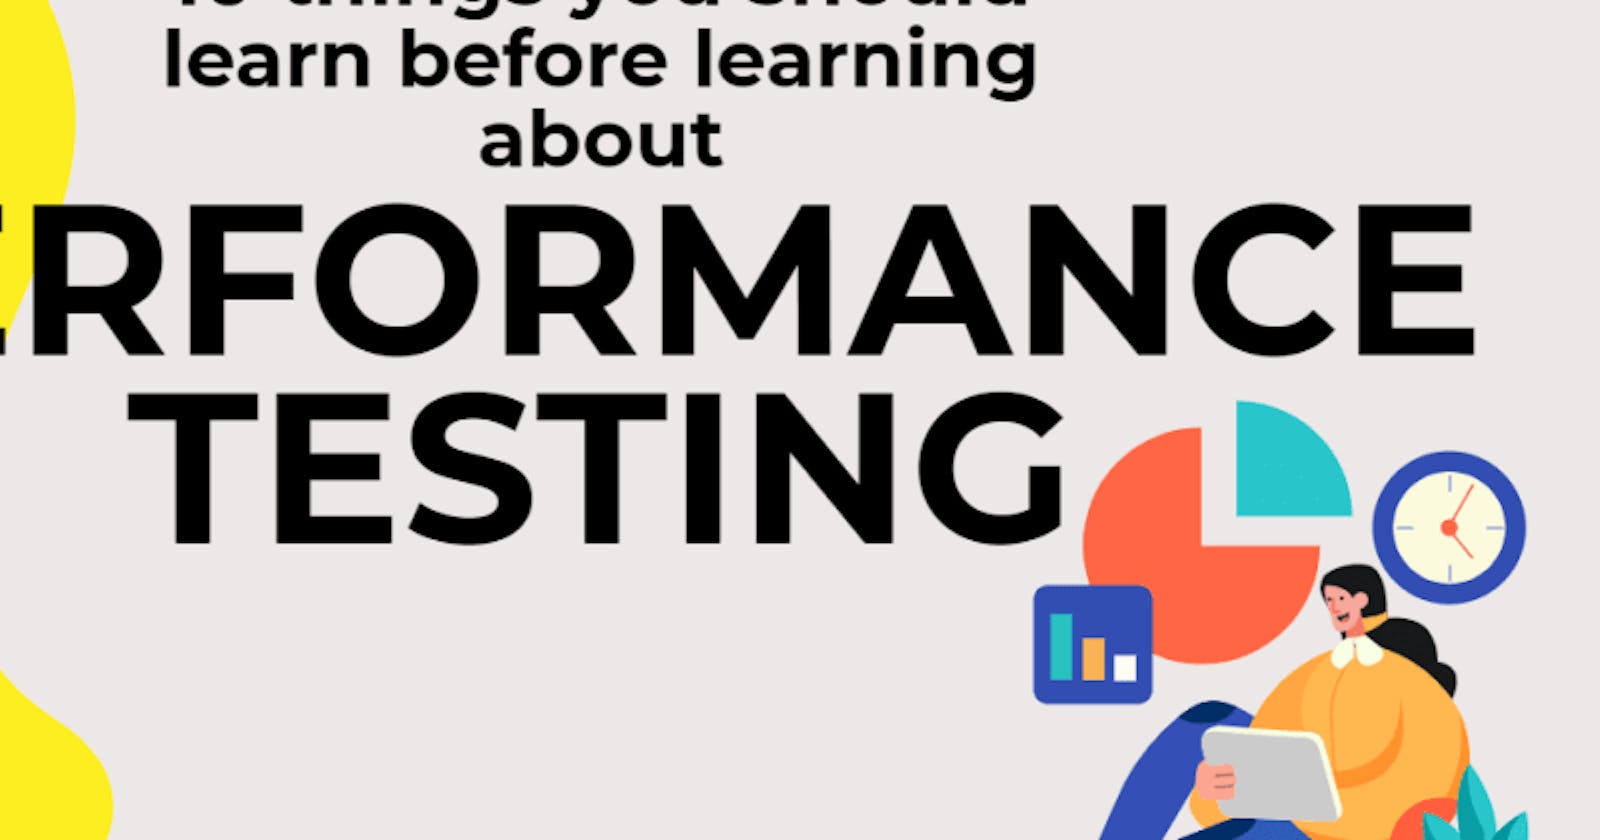 Ten things you should learn before learning about performance testing